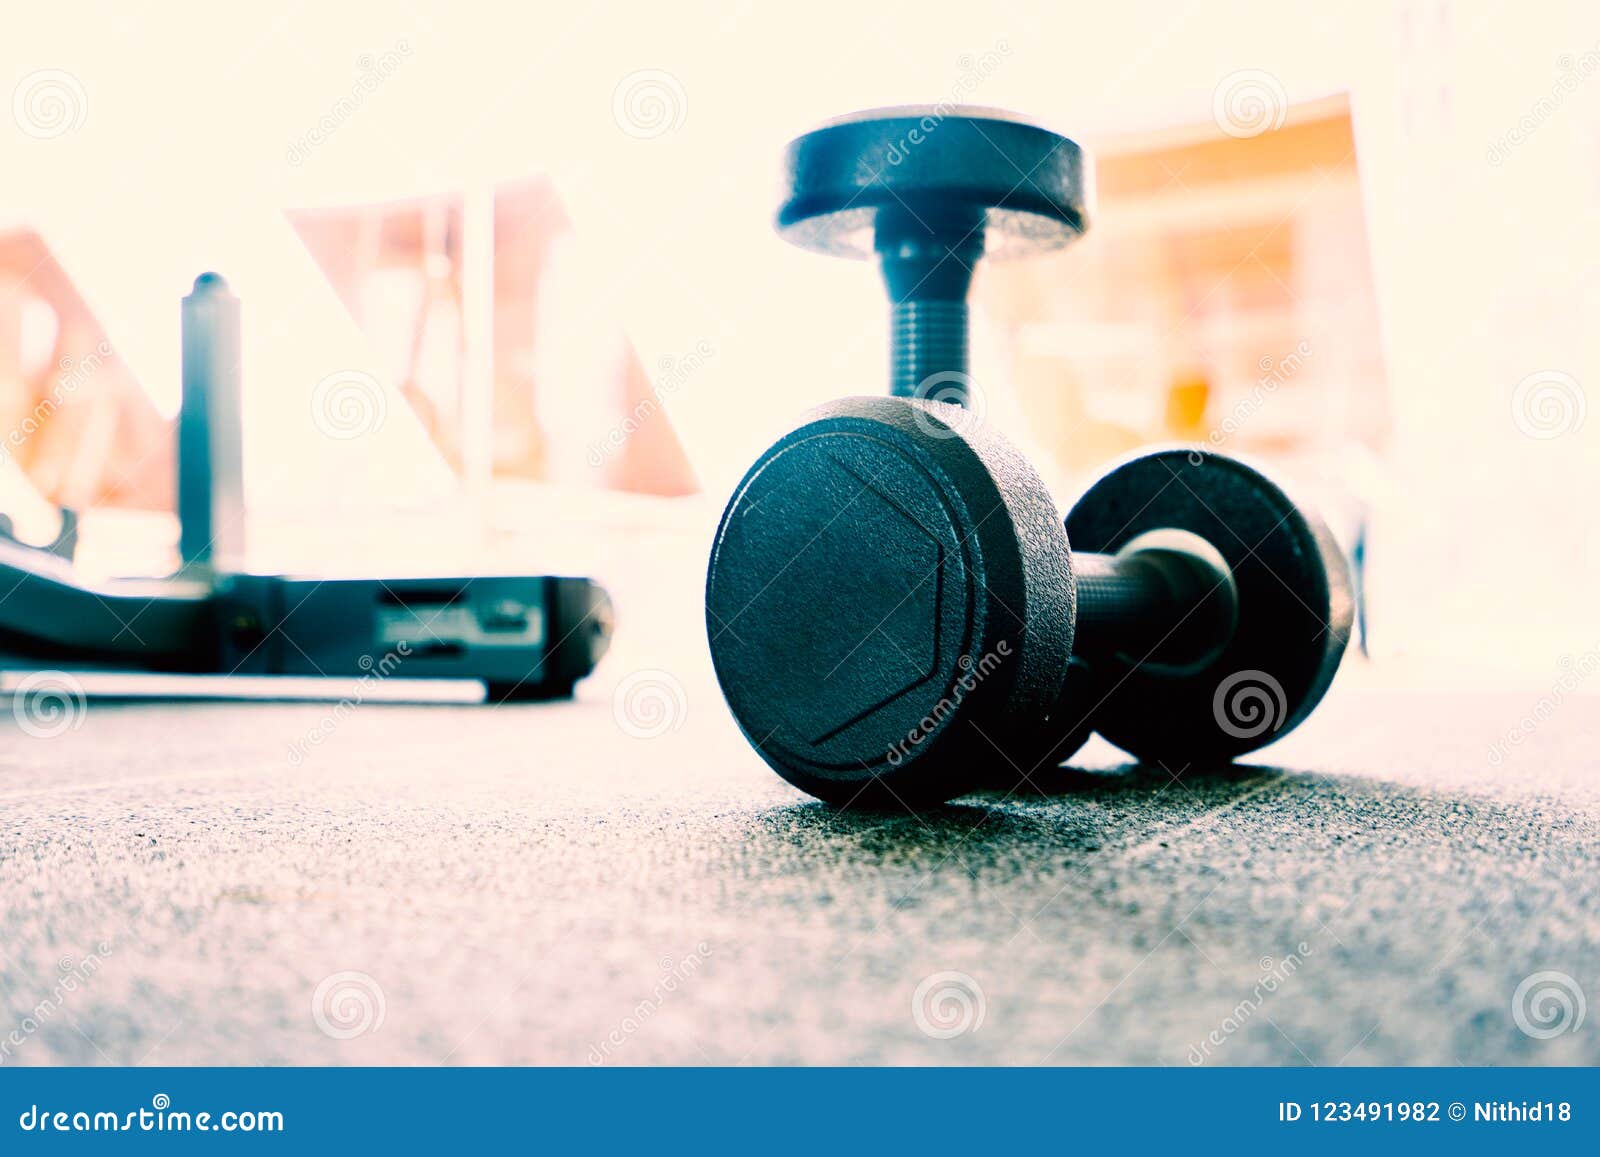 Dumbbell on the Floor in Fitness Room Stock Photo - Image of exercise ...